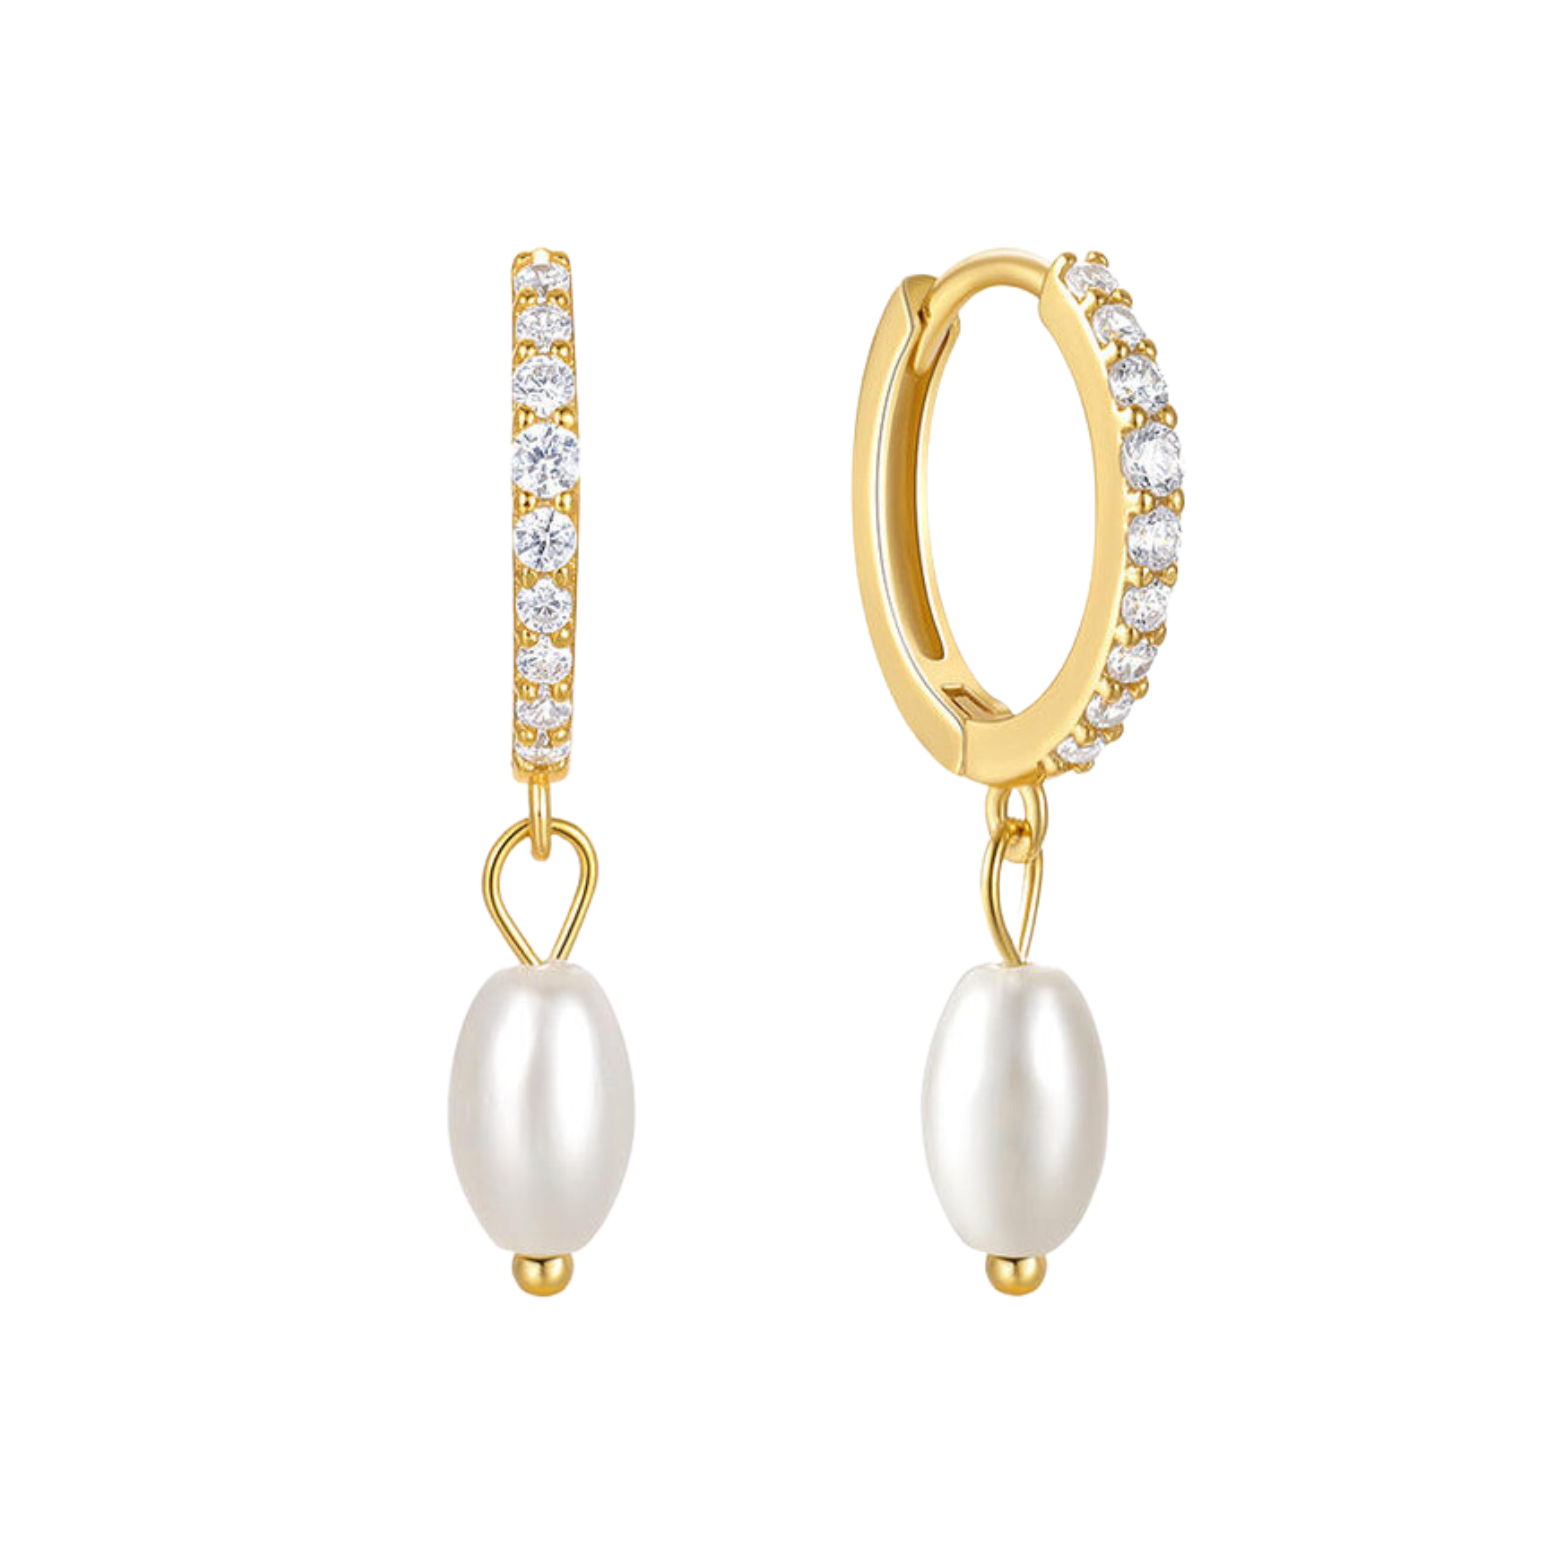 14K gold-plated Kayla hoop earrings with pearls